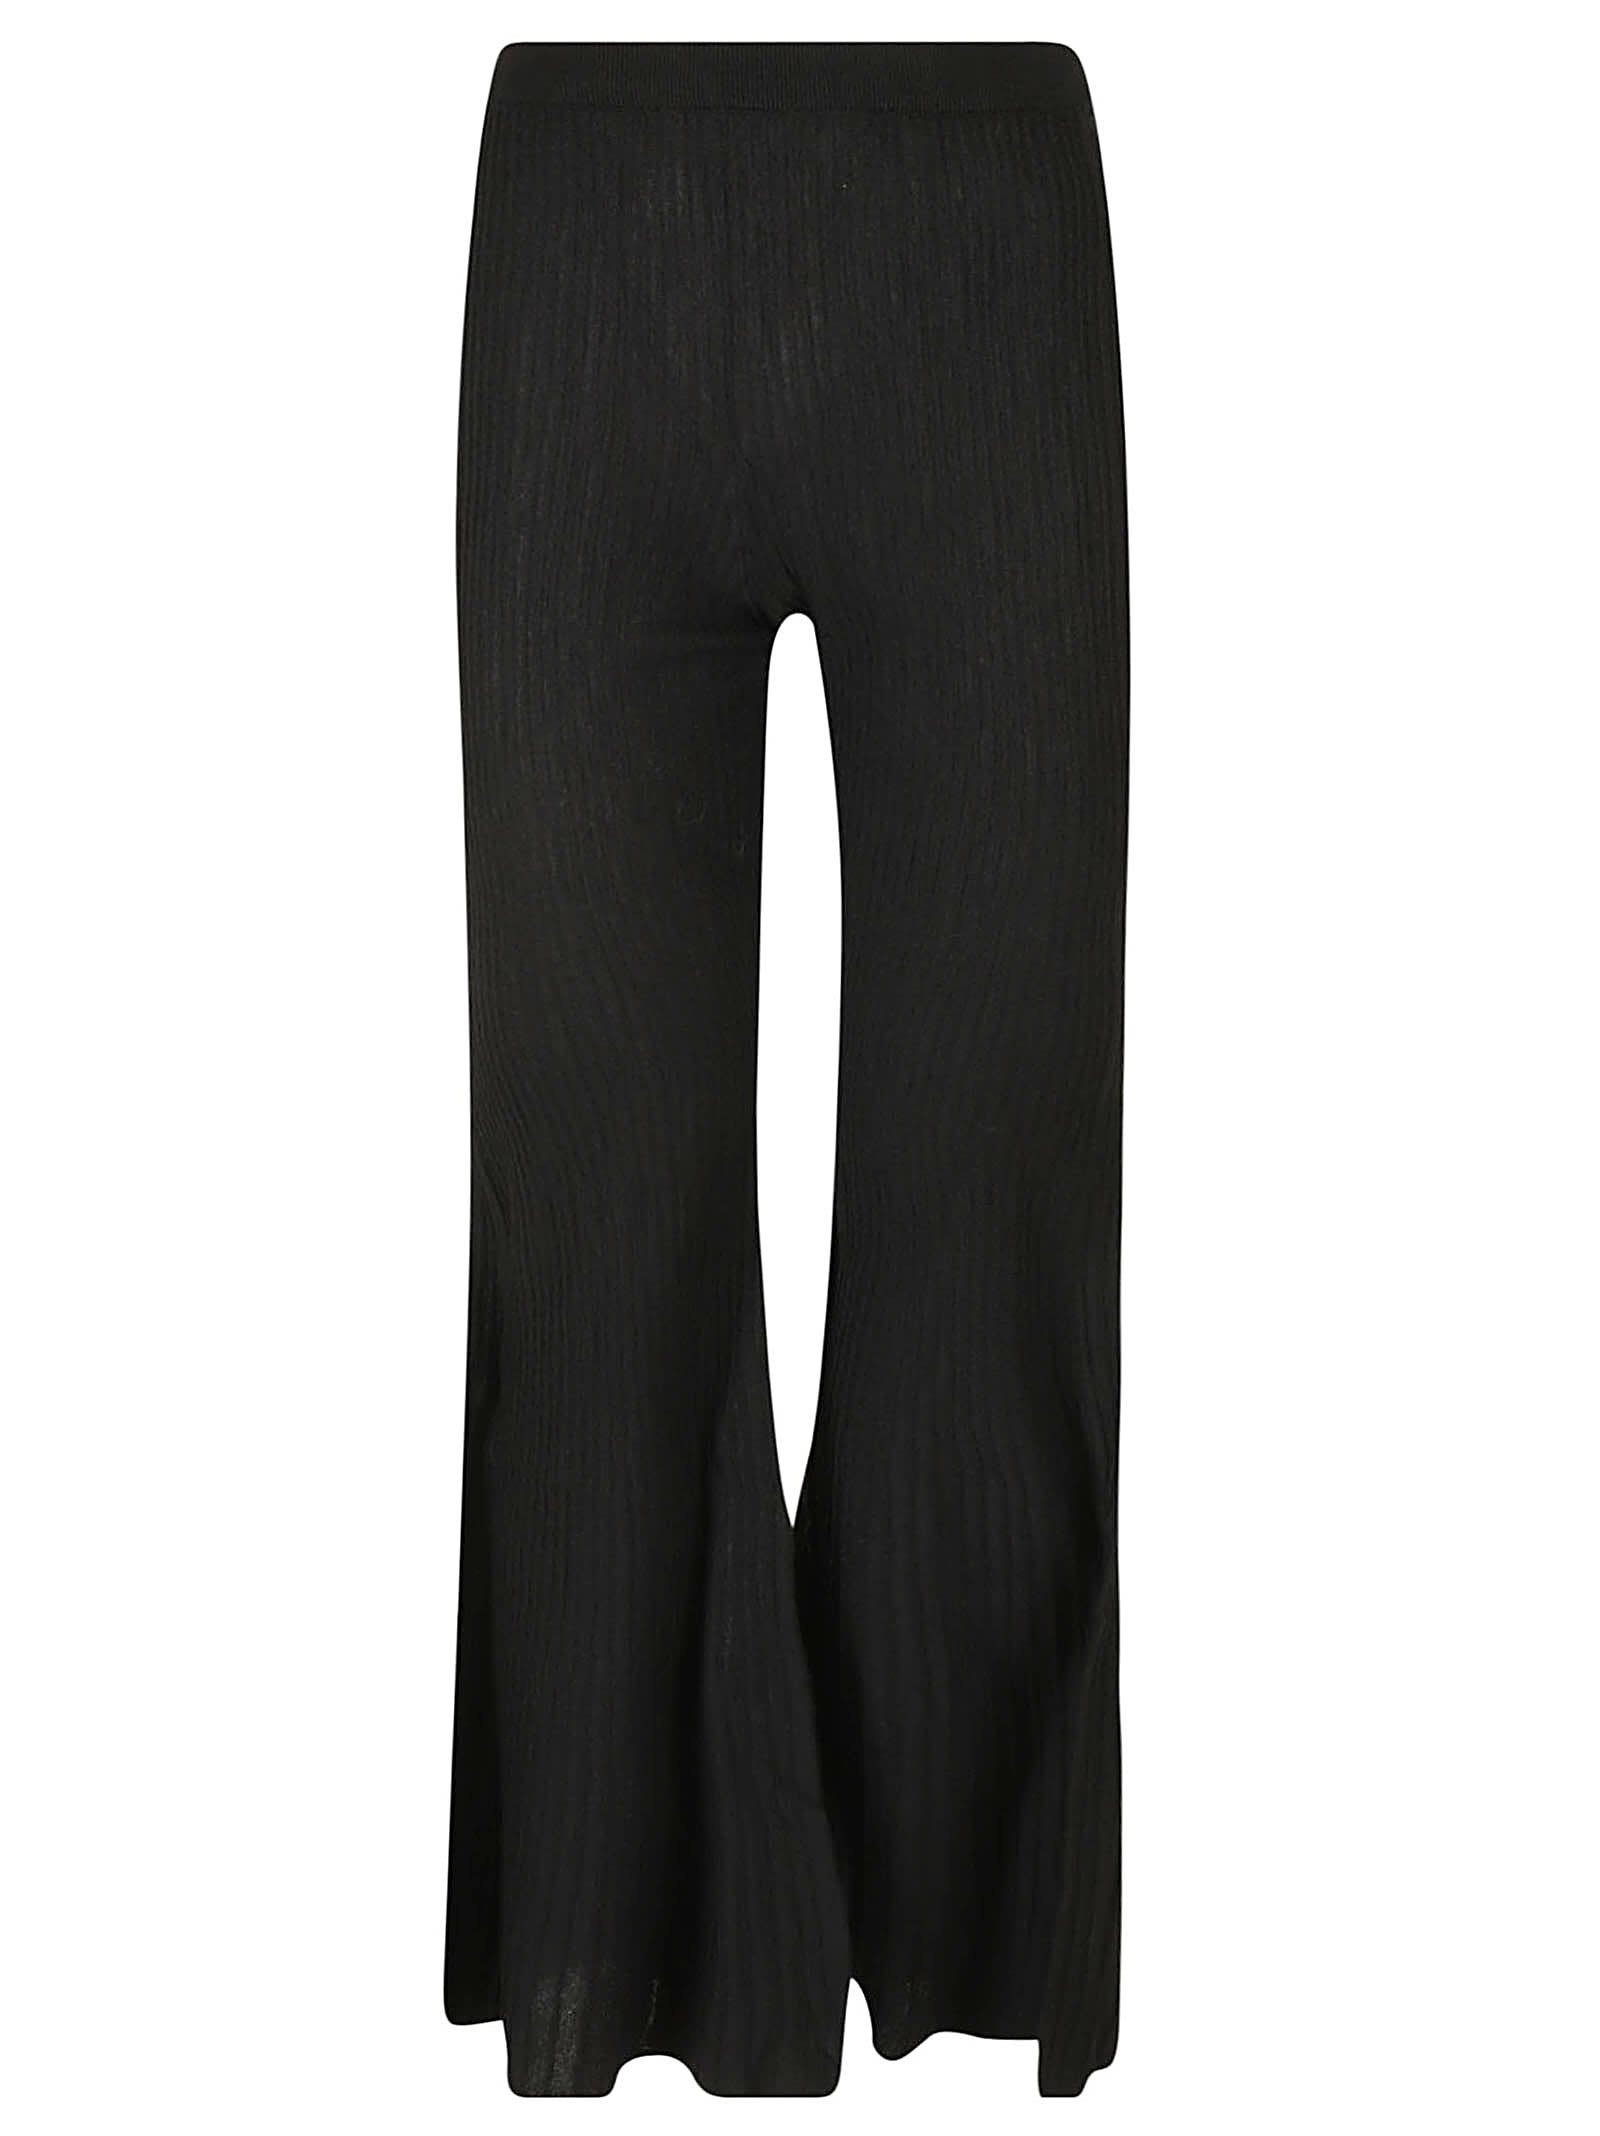 Boutique Moschino Ribbed Flare Leg Trousers